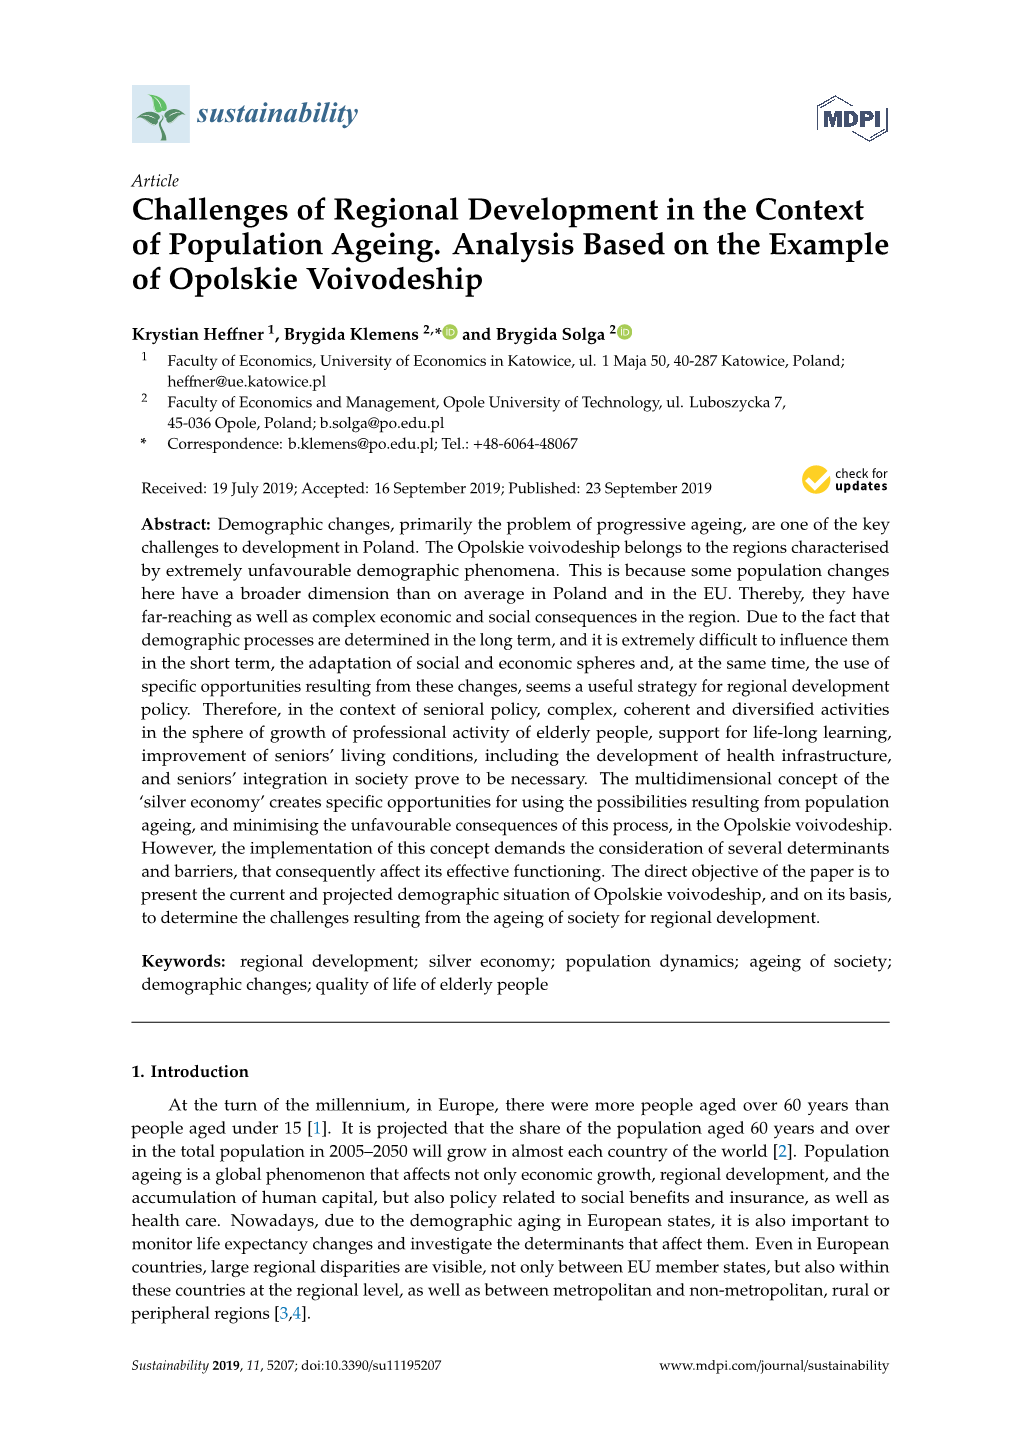 Challenges of Regional Development in the Context of Population Ageing. Analysis Based on the Example of Opolskie Voivodeship